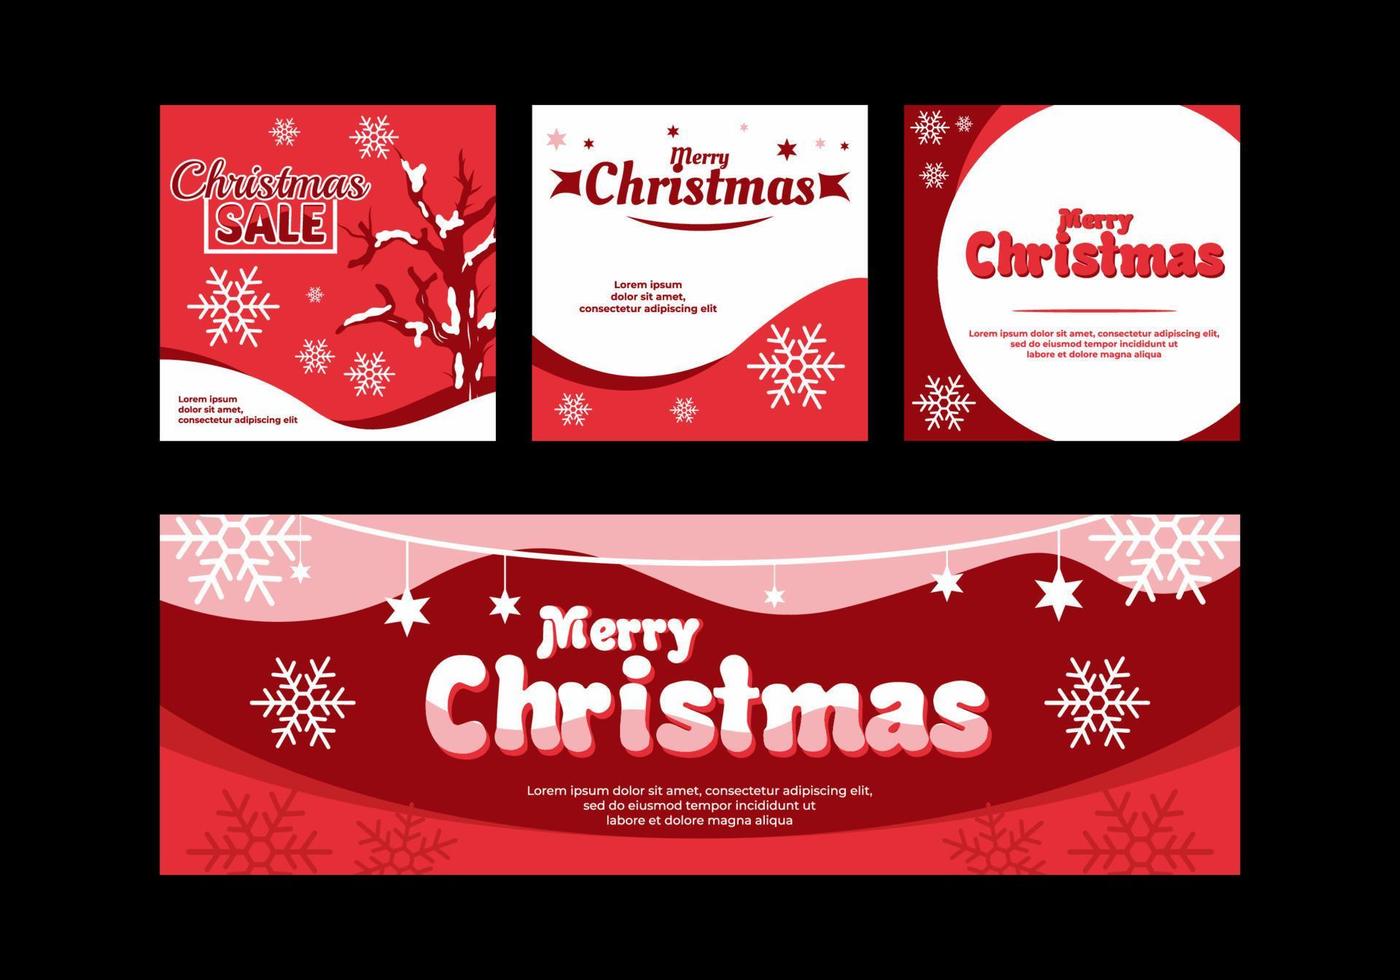 Christmas social media banner and ads design in red color vector